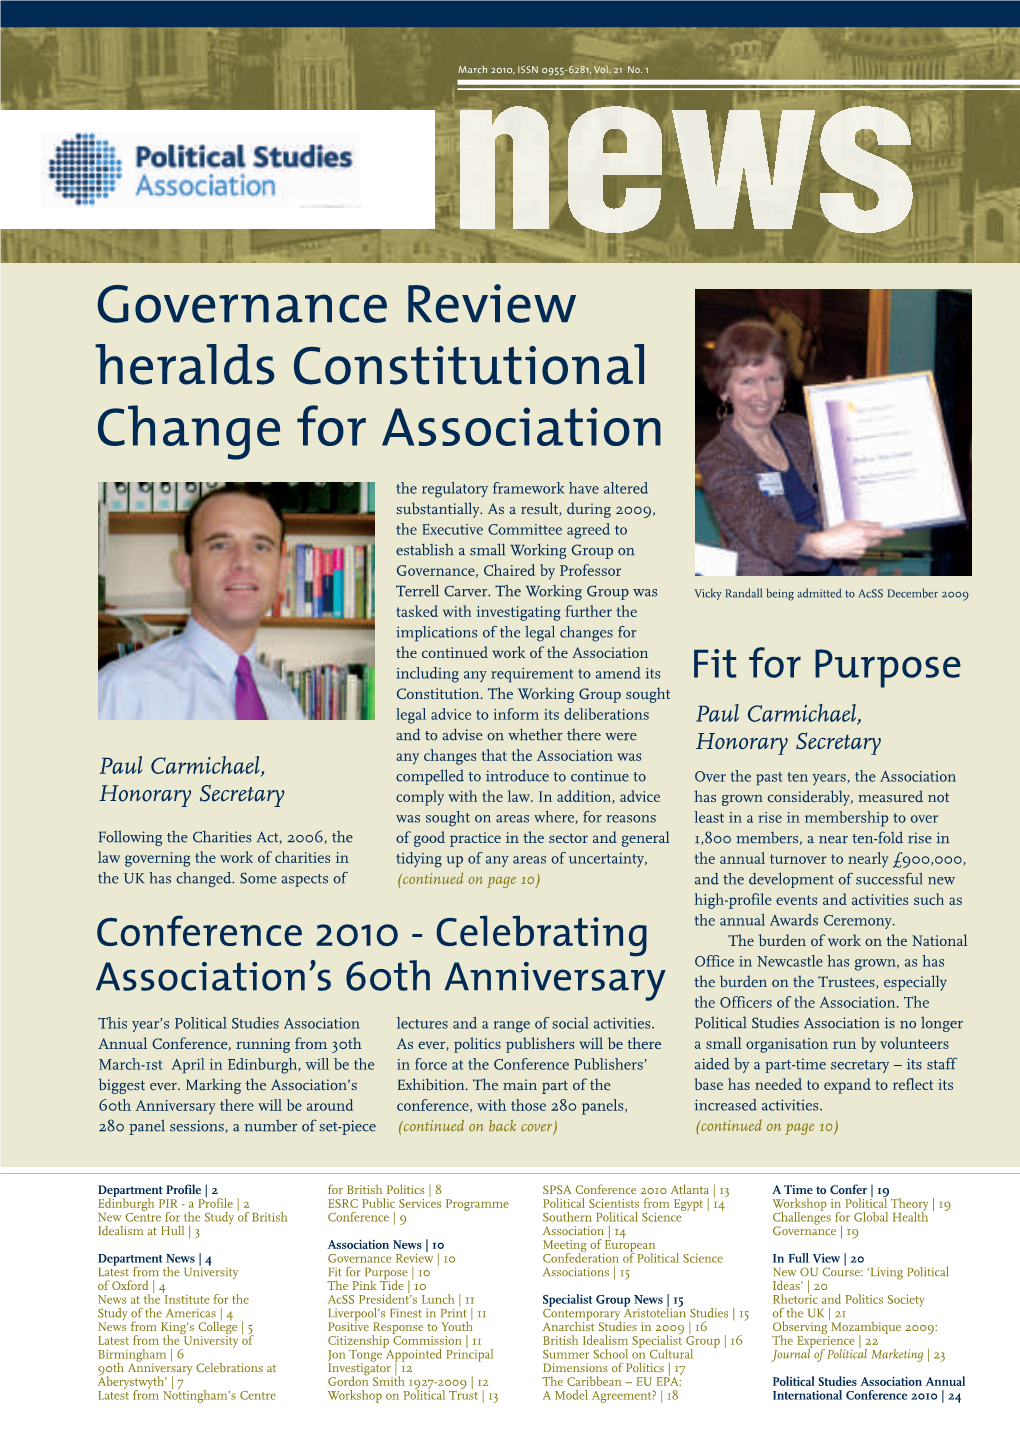 Governance Review Heralds Constitutional Change for Association the Regulatory Framework Have Altered Substantially